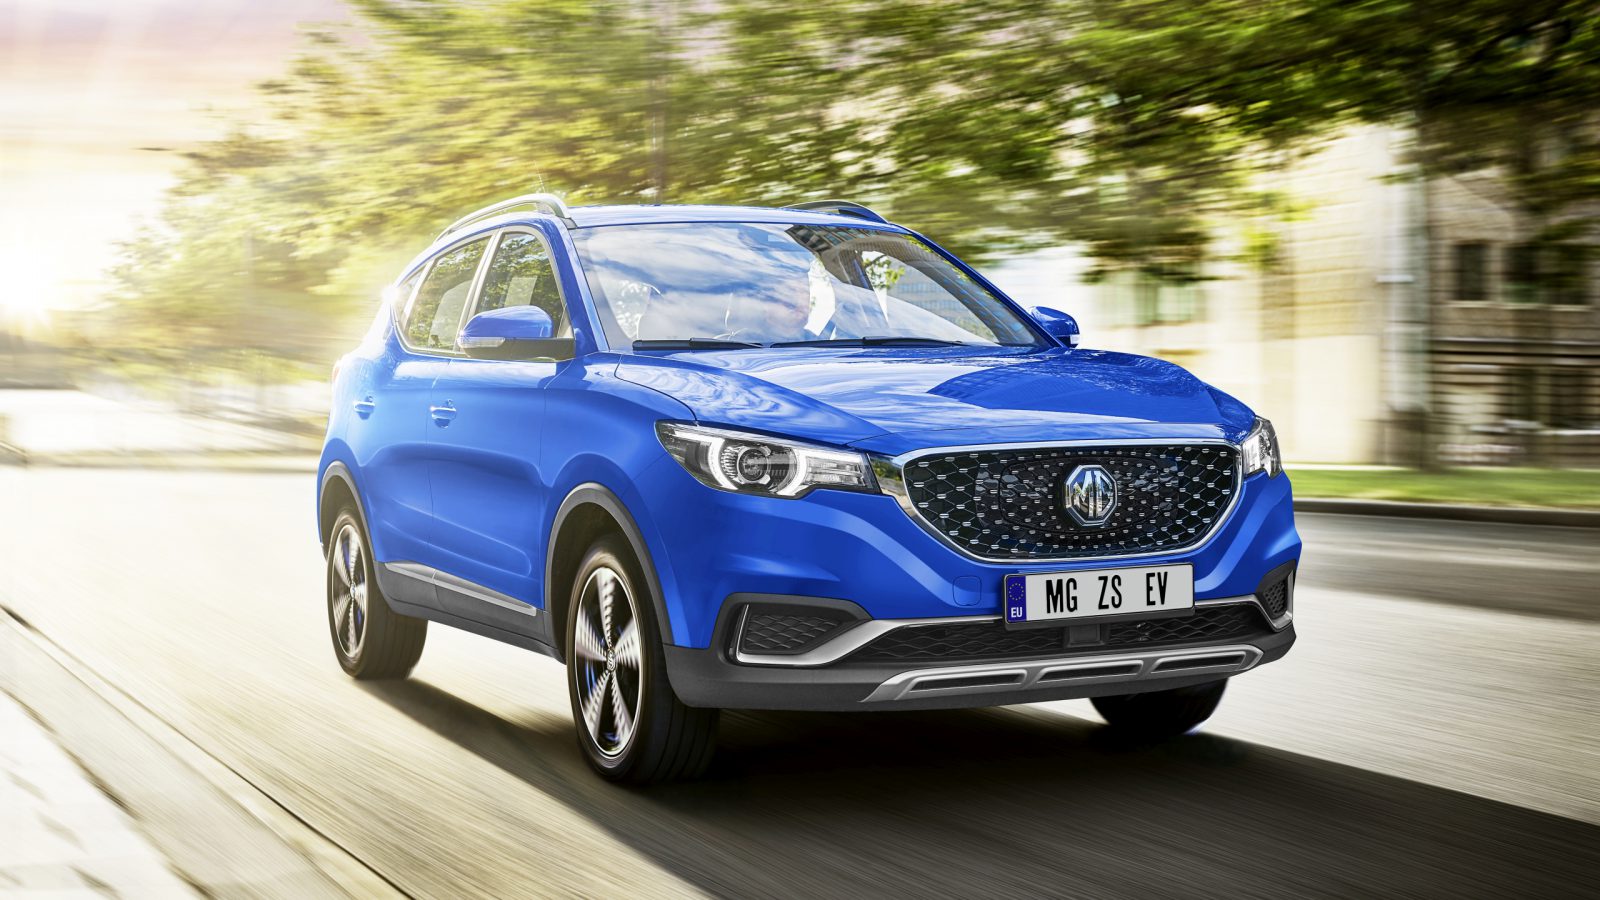 Mg Motors First Ever All Electric Suv The Mg Zs Ev Is Now Available ...